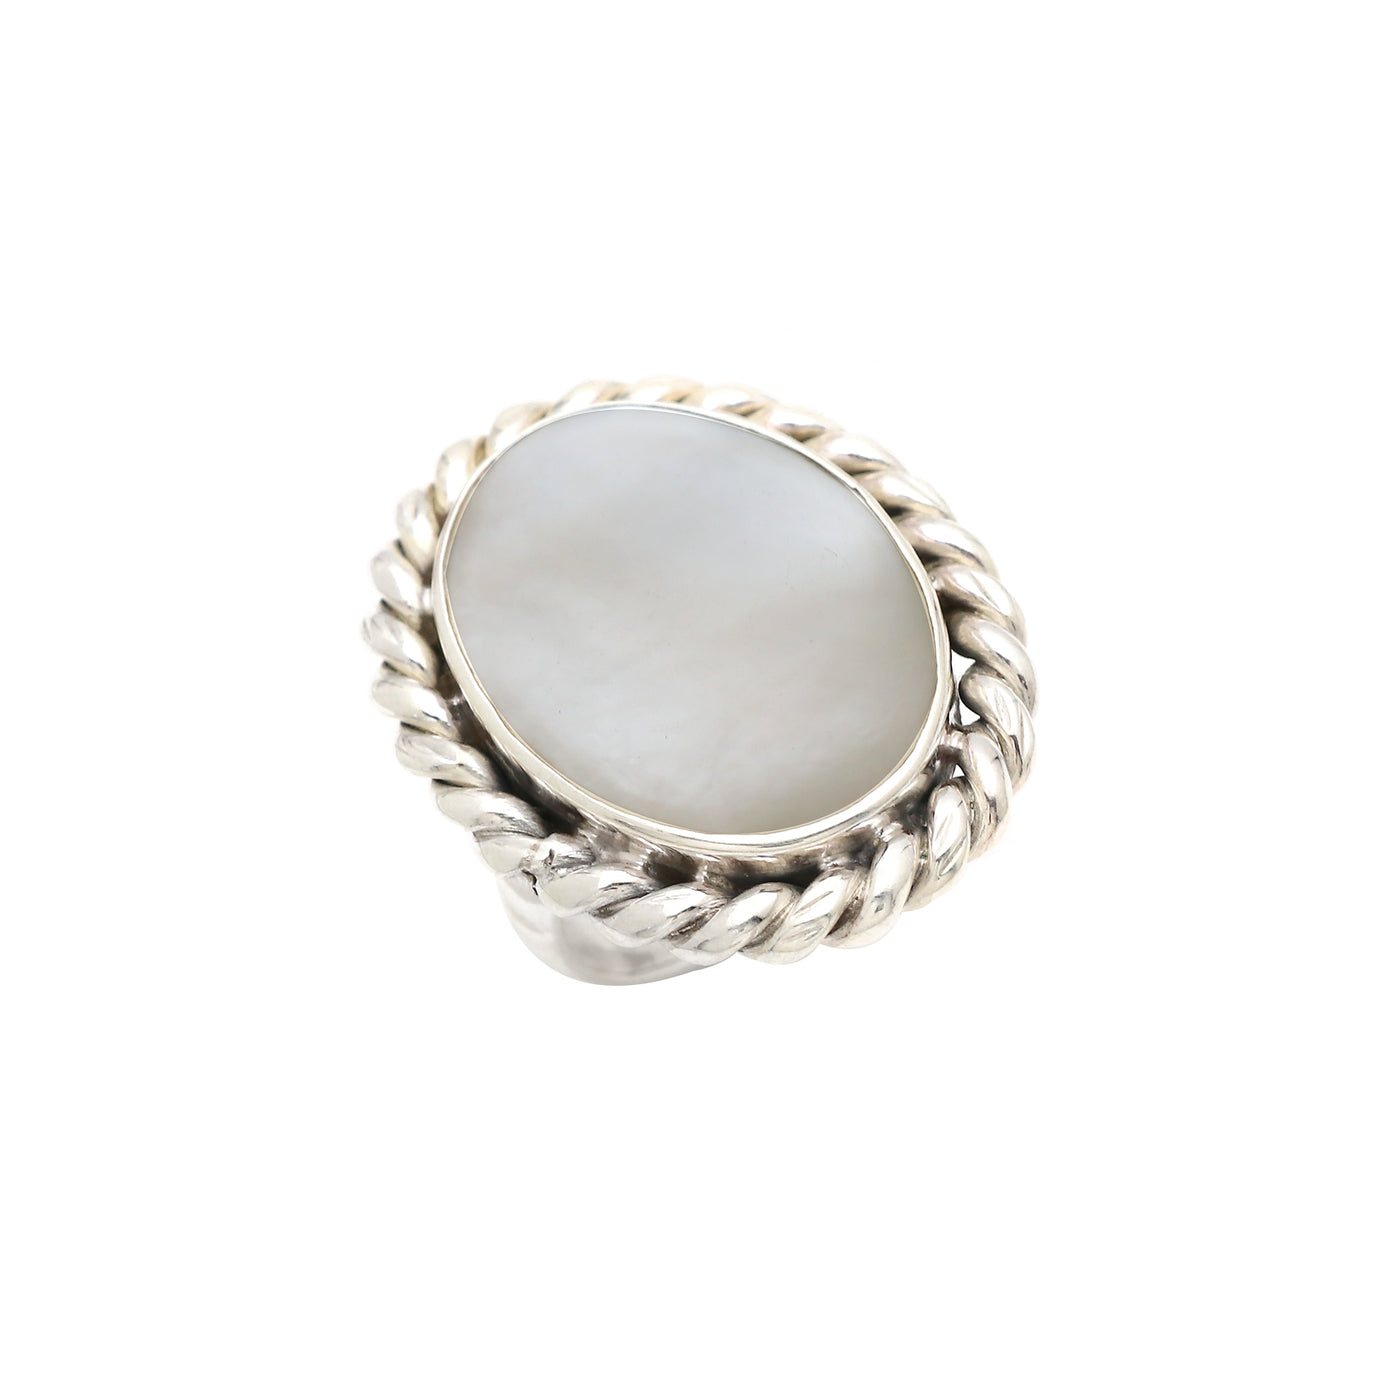 Rope Pearl Ring